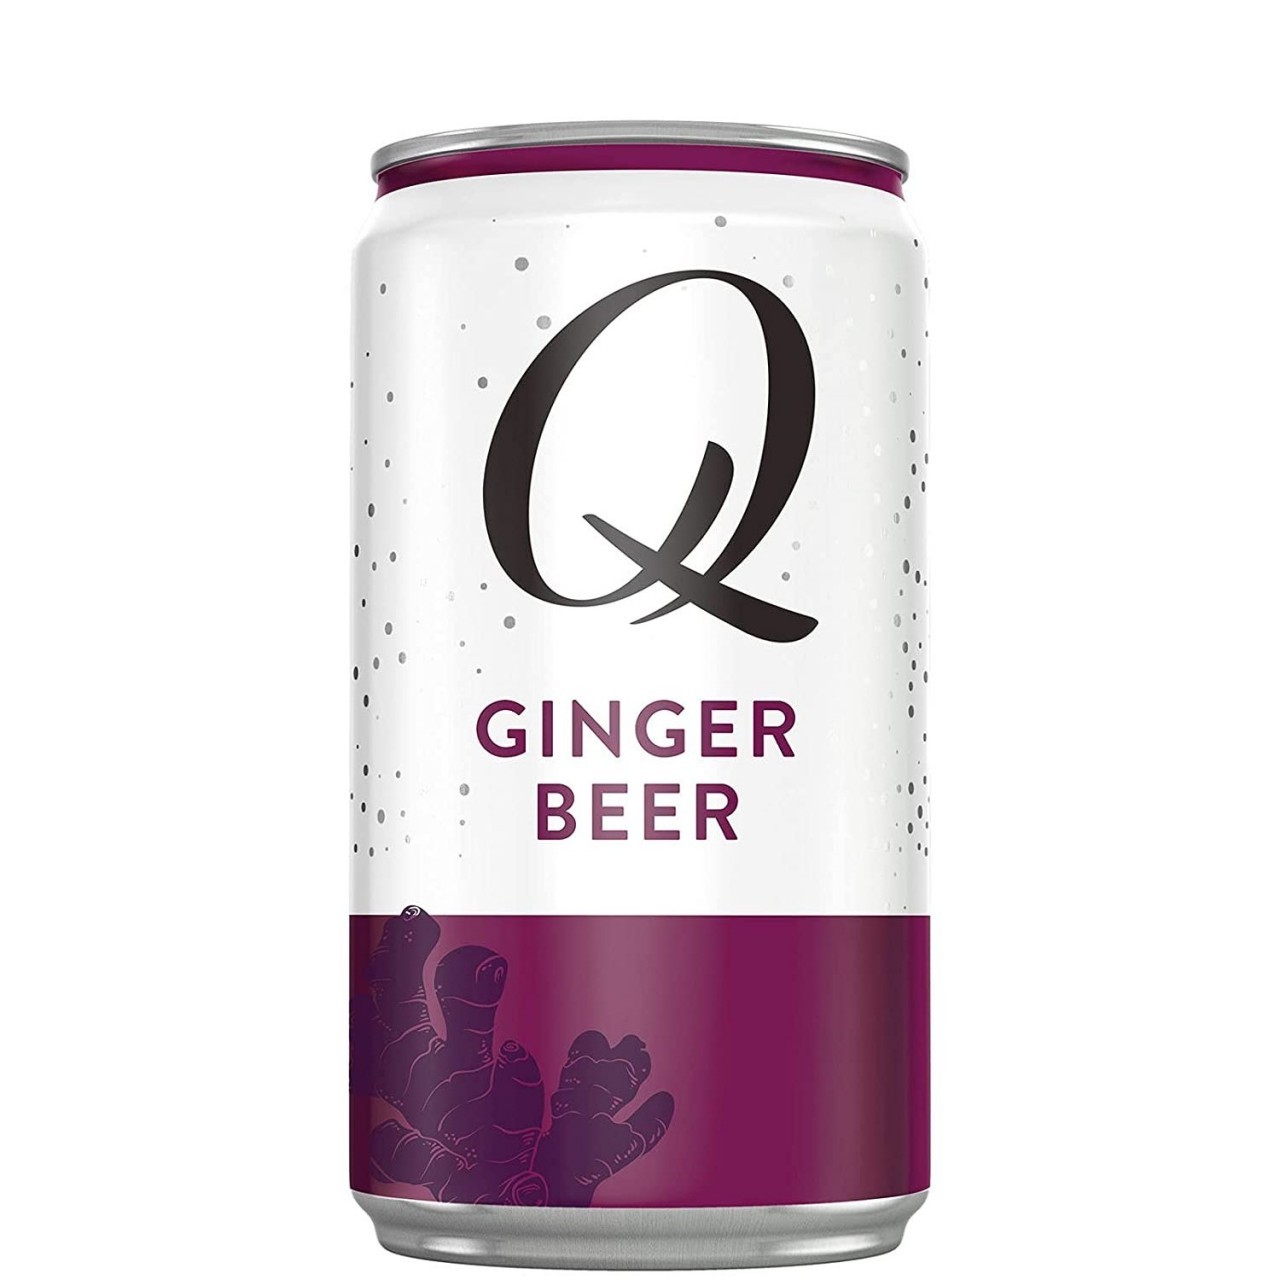 Q GINGER BEER CAN 222ml